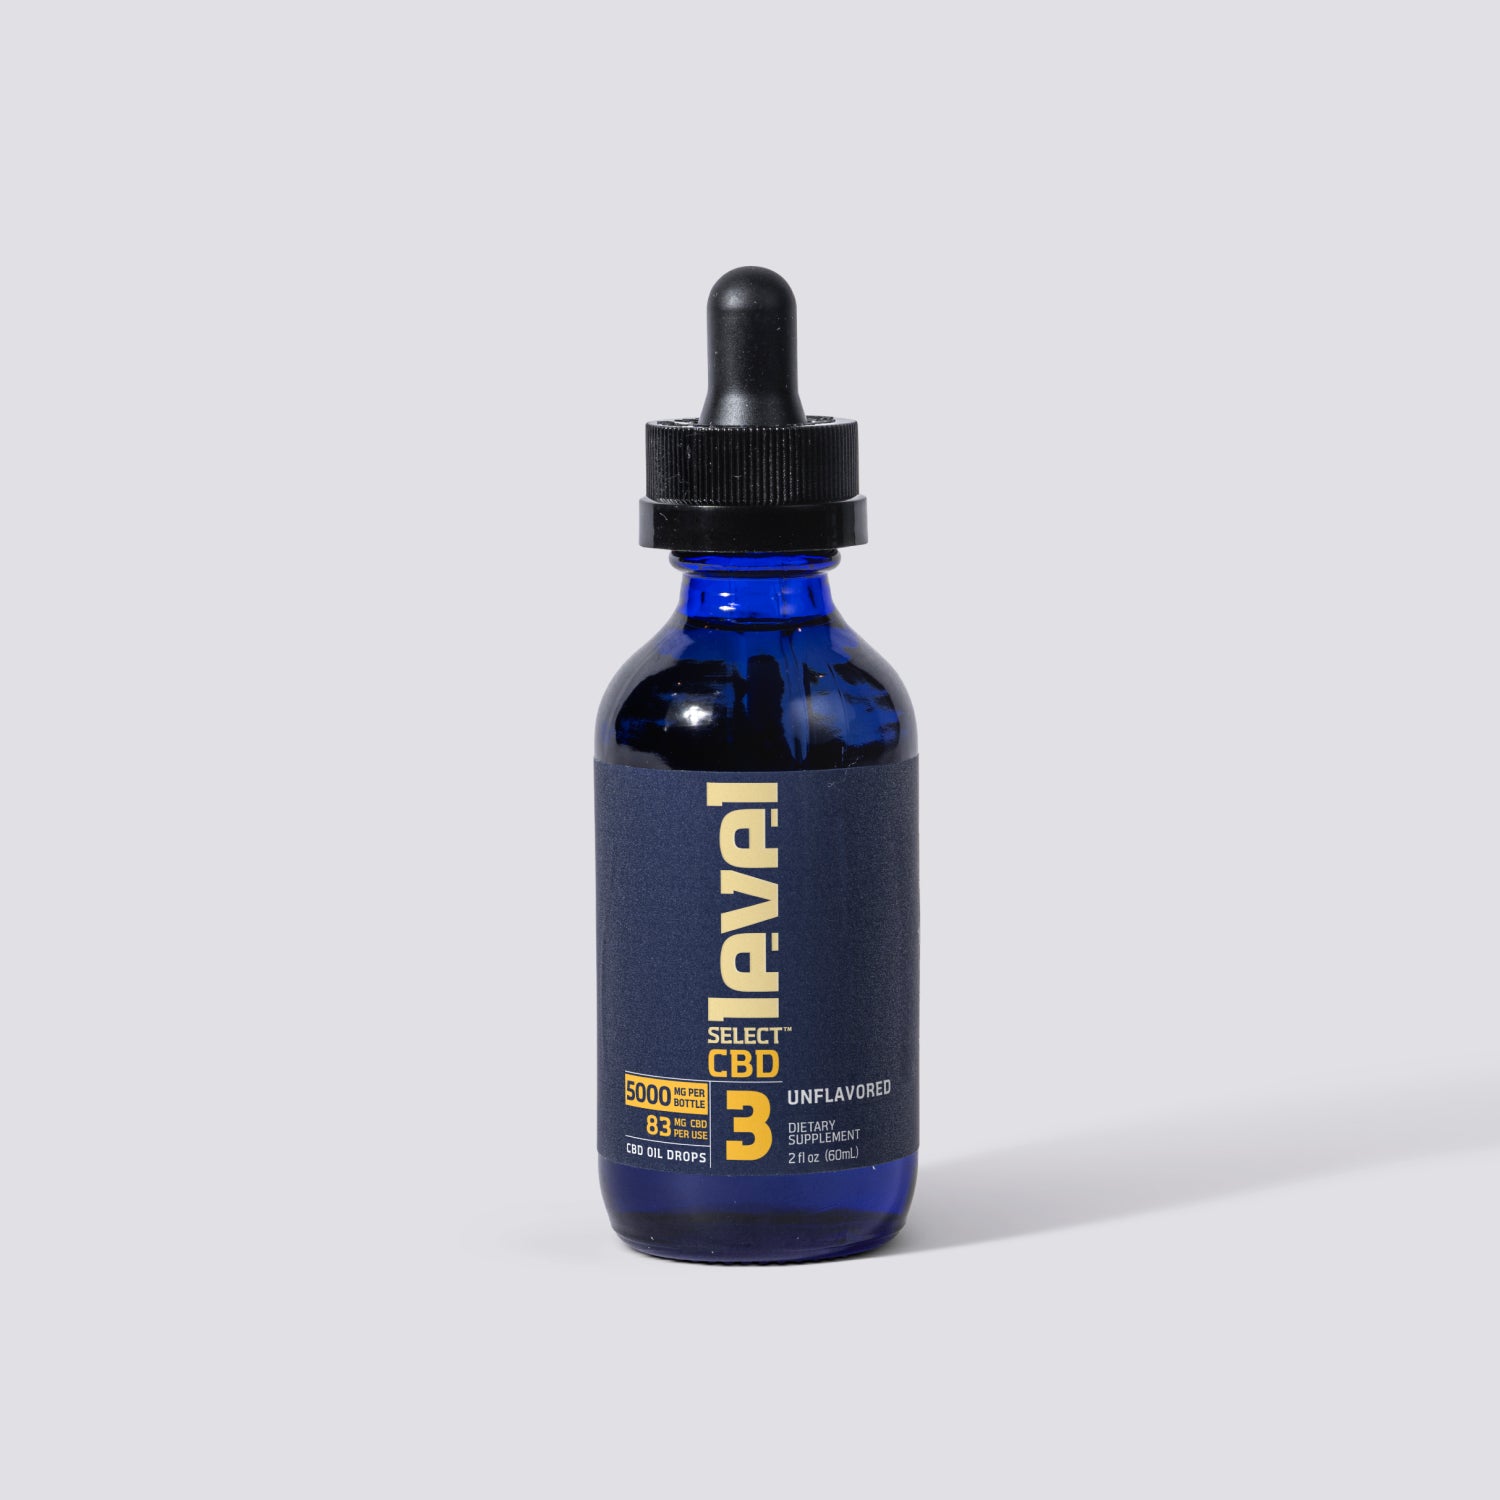 LVL 3 Daily Drops - Unflavored - 5000MG CBD